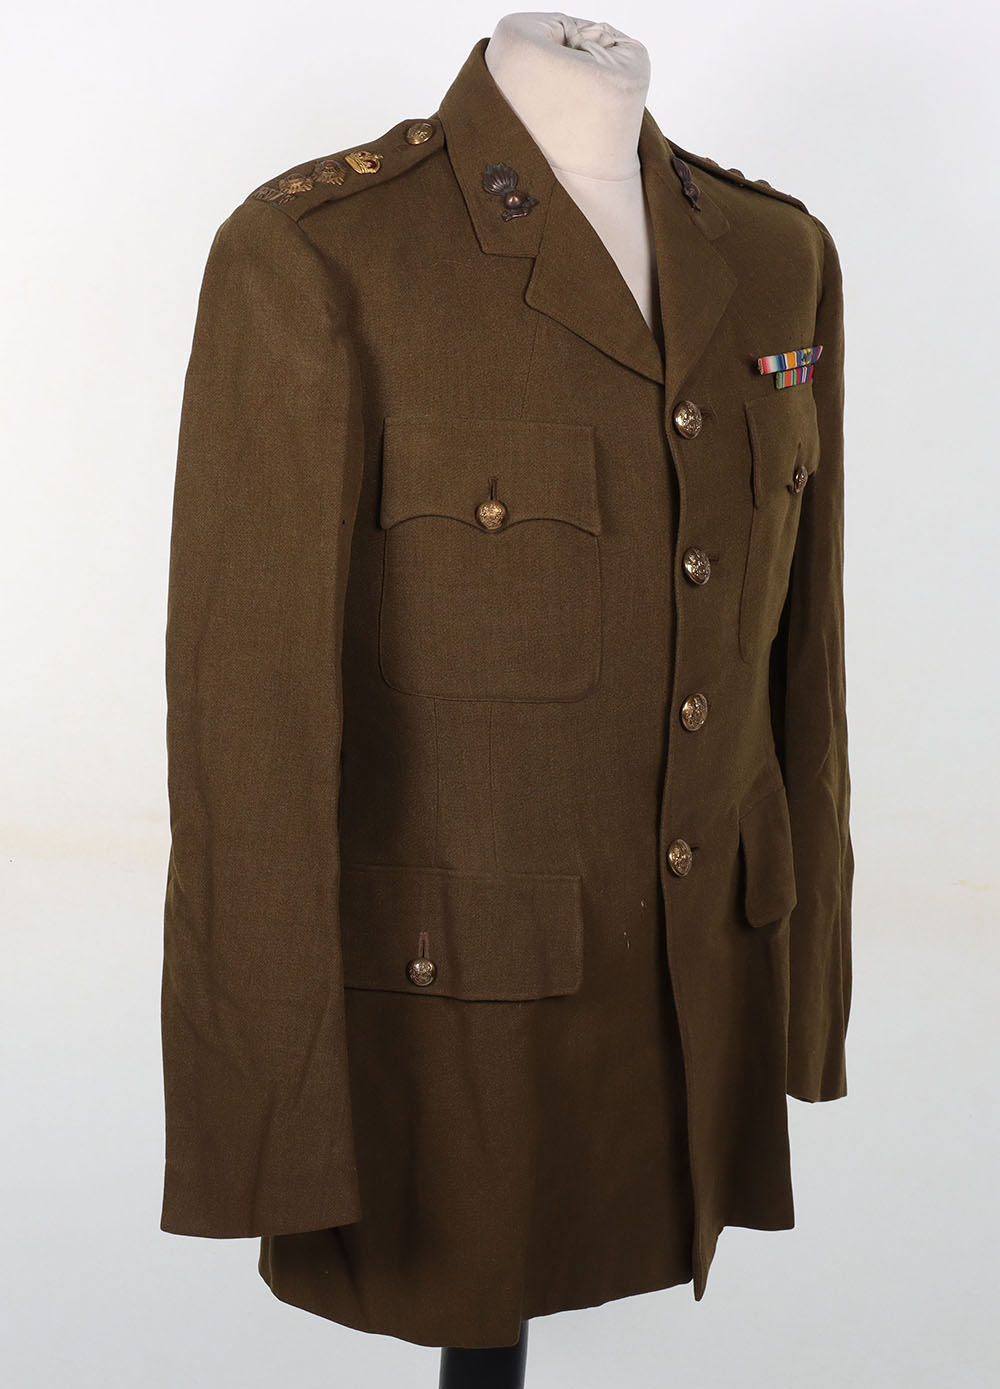 WW2 British Officers Service Dress Tunic of Colonel Robert H Sims 2nd Battalion Royal Welch Fusilier - Image 5 of 7